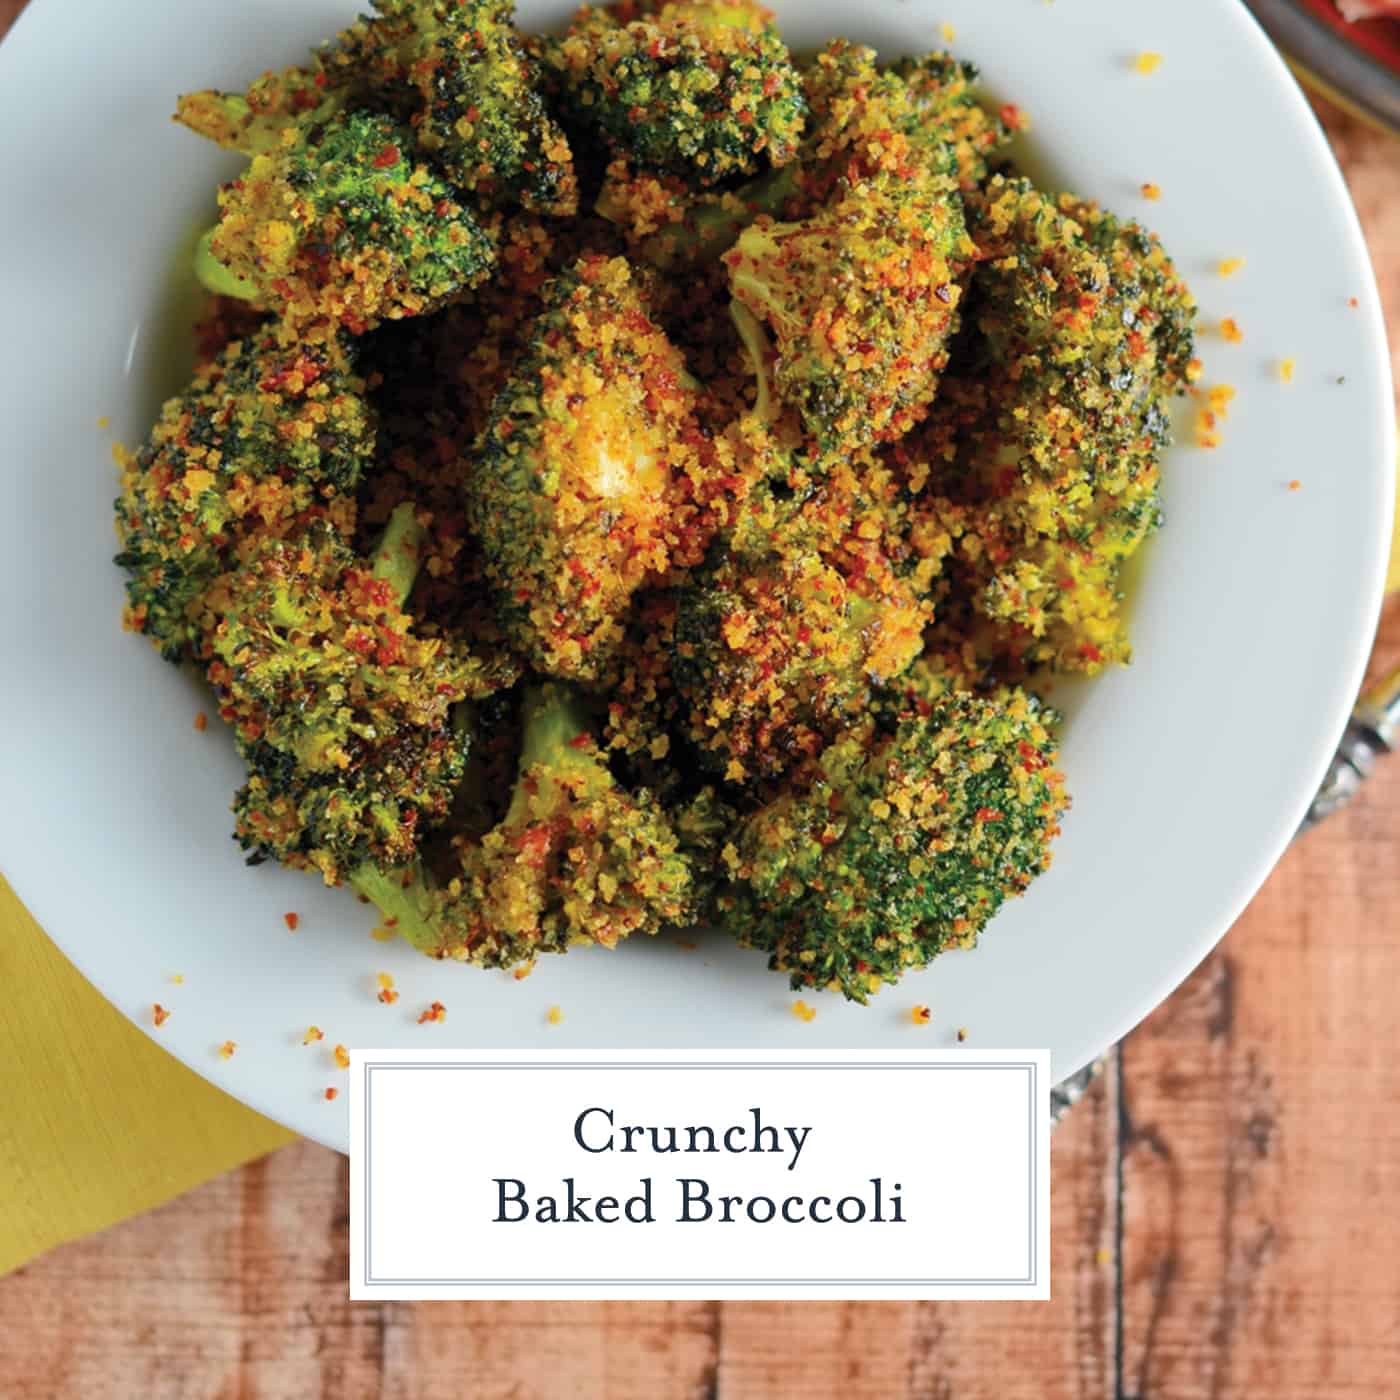 Crunchy baked broccoli tossed in a crisp, tangy mix with two secret ingredients that will make this broccoli recipe your favorite side dish! #bakedbroccoli #ovenbakedbroccoli www.savoryexperiments.com 